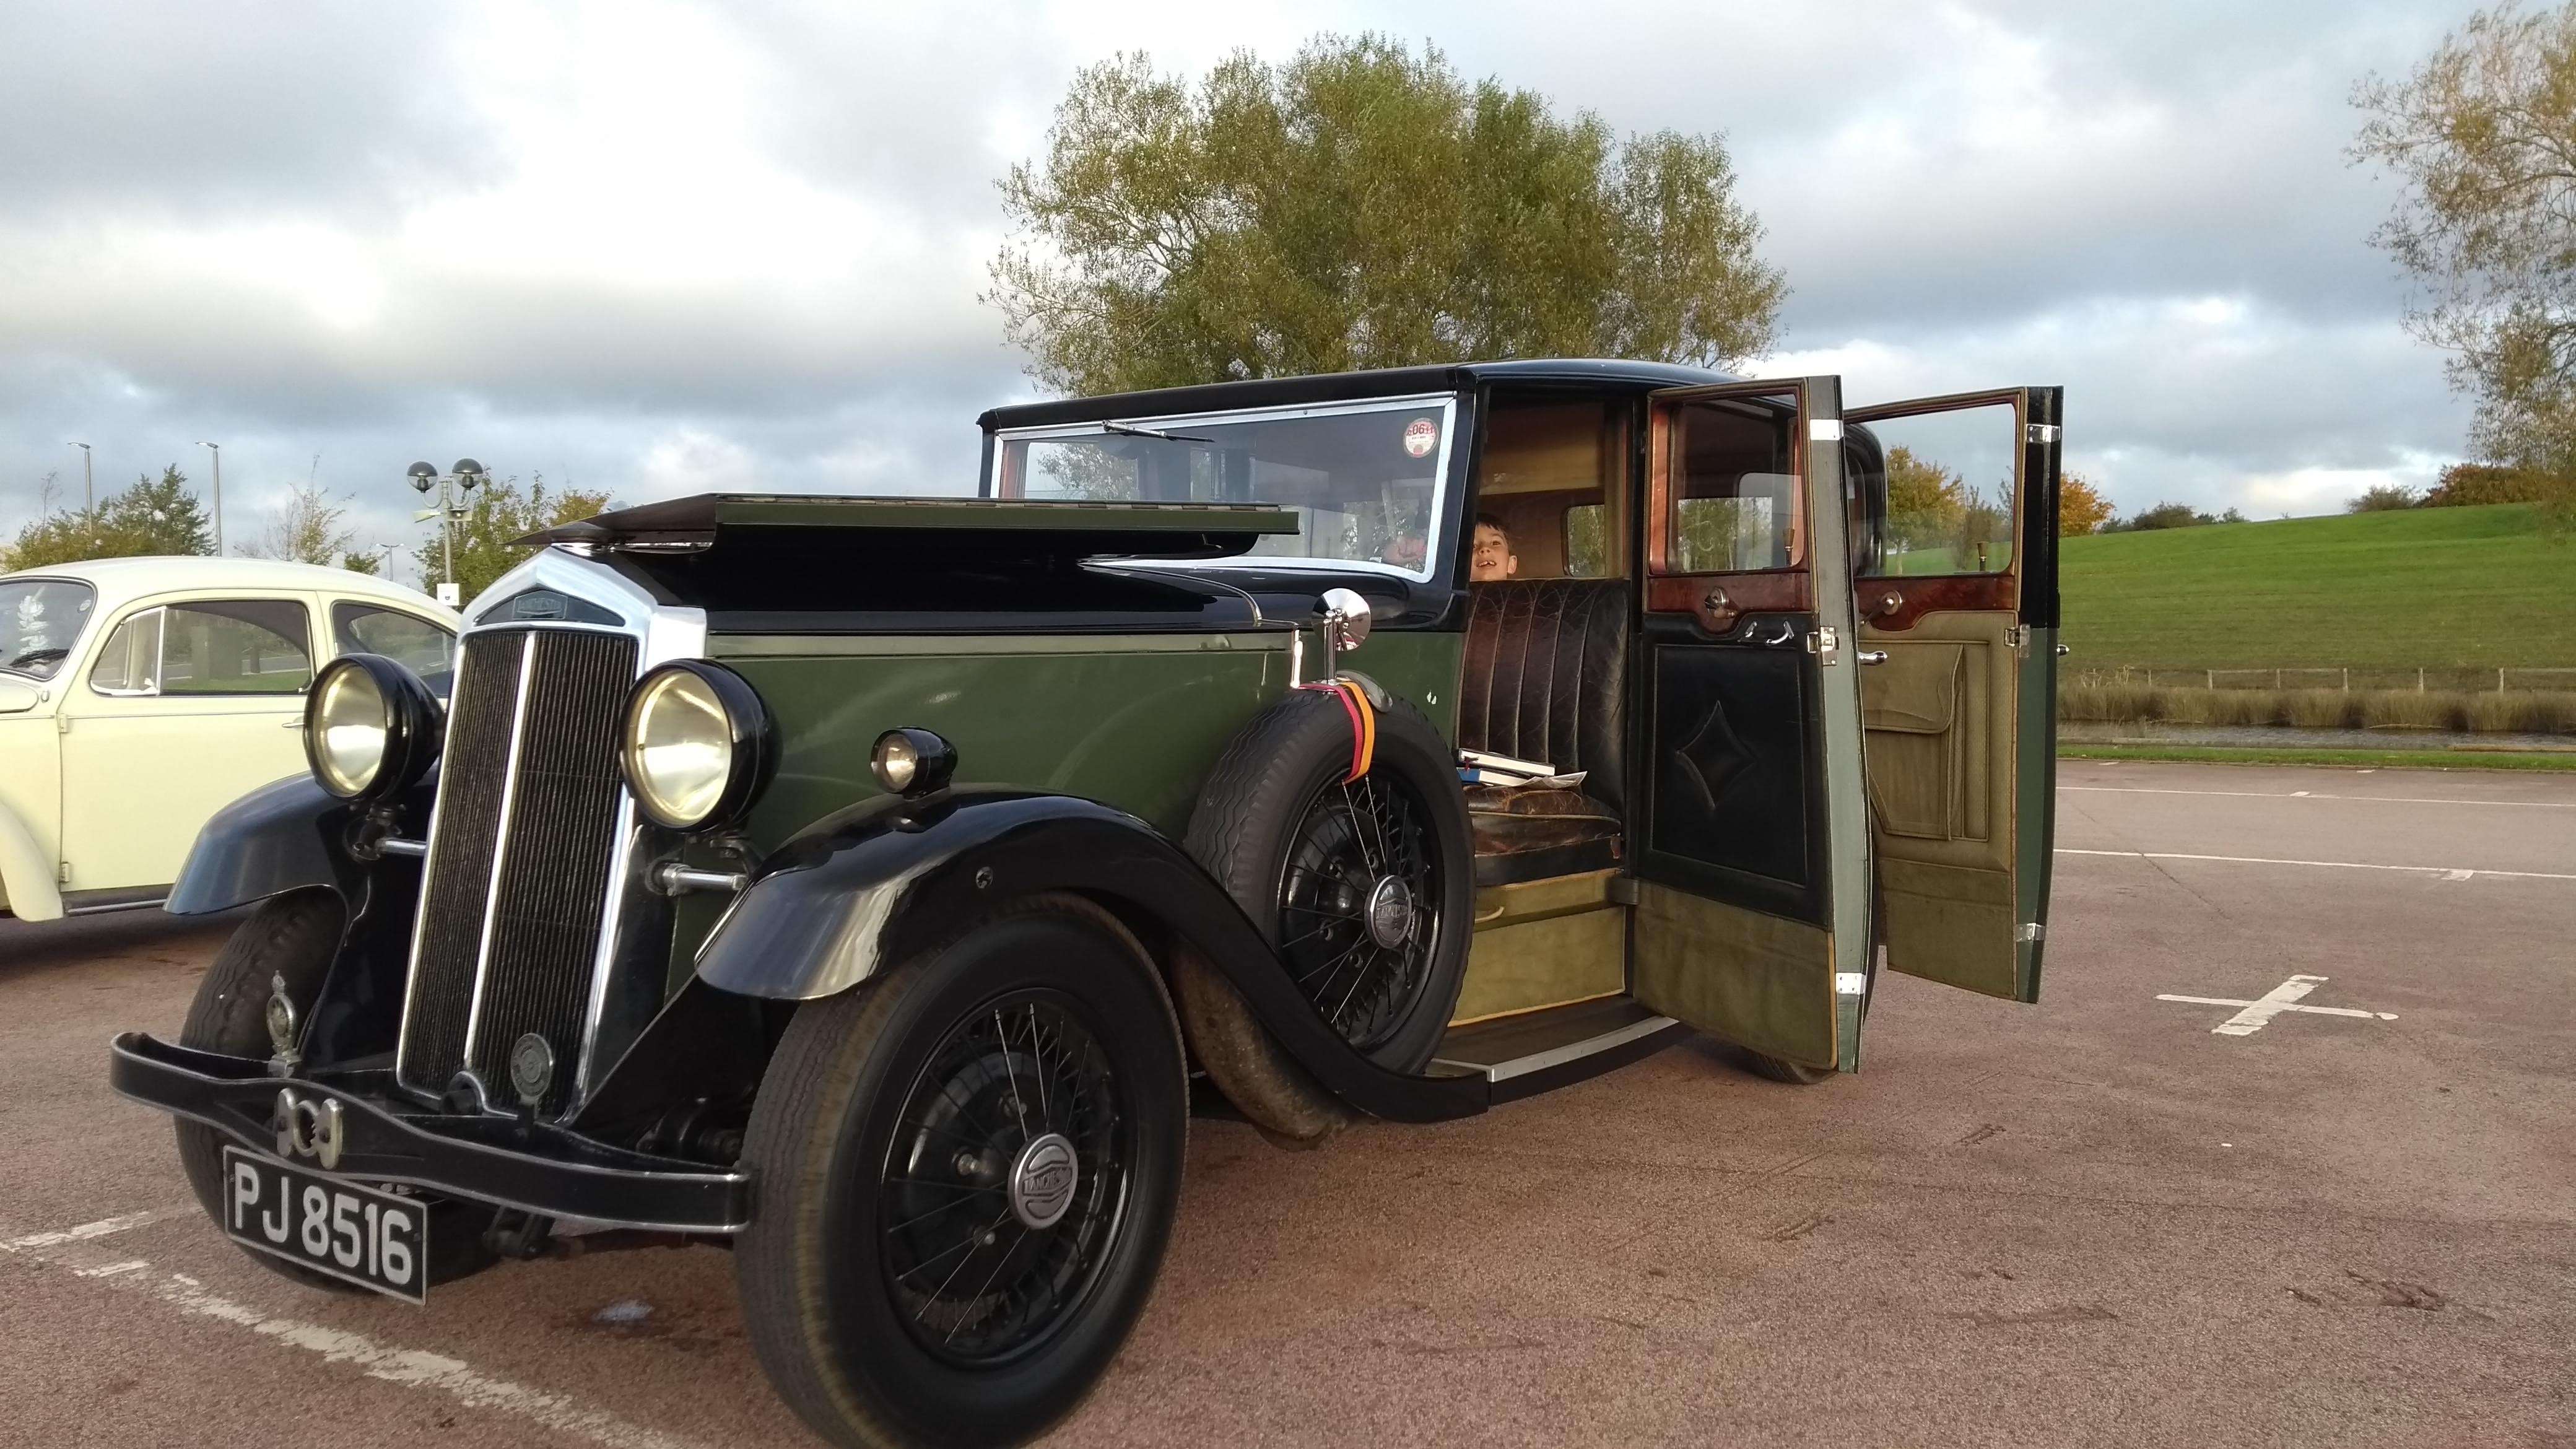 The first outing of Coventry University's 1932 Lanchester 15-18 at the British Motor Museum's first Gaydon Gathering